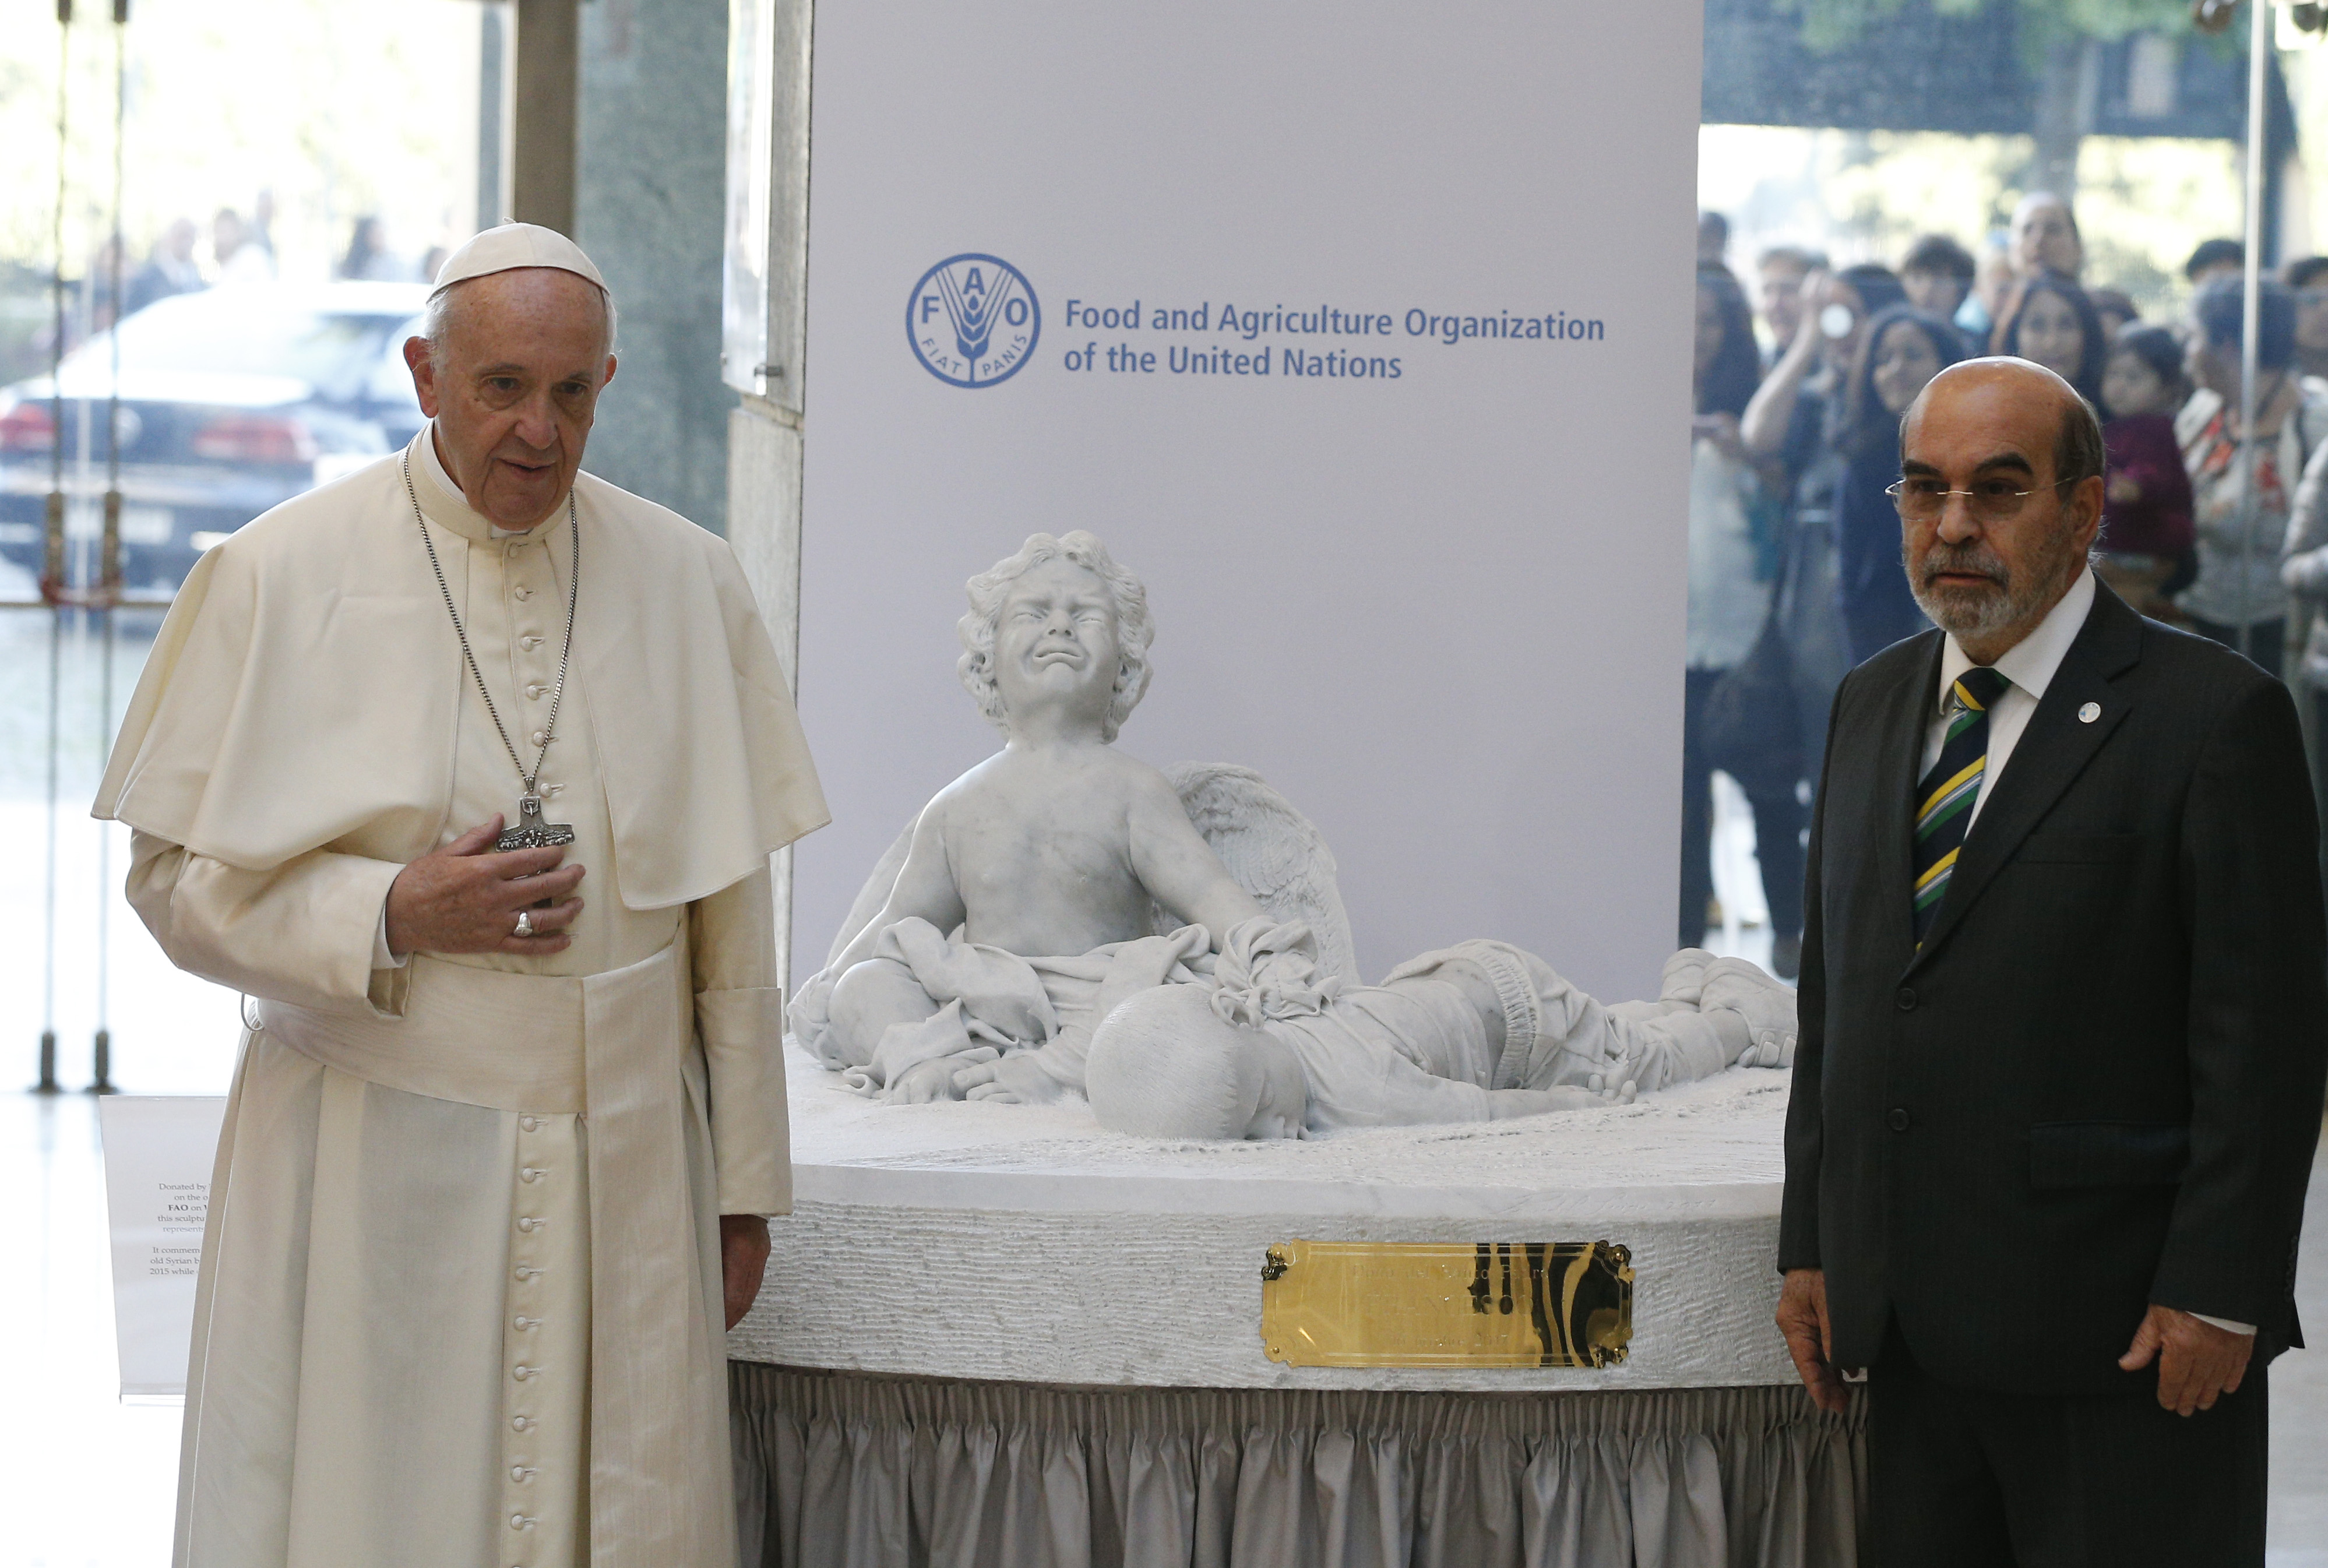 To fight hunger and forced migration, end war and arms trade, pope says